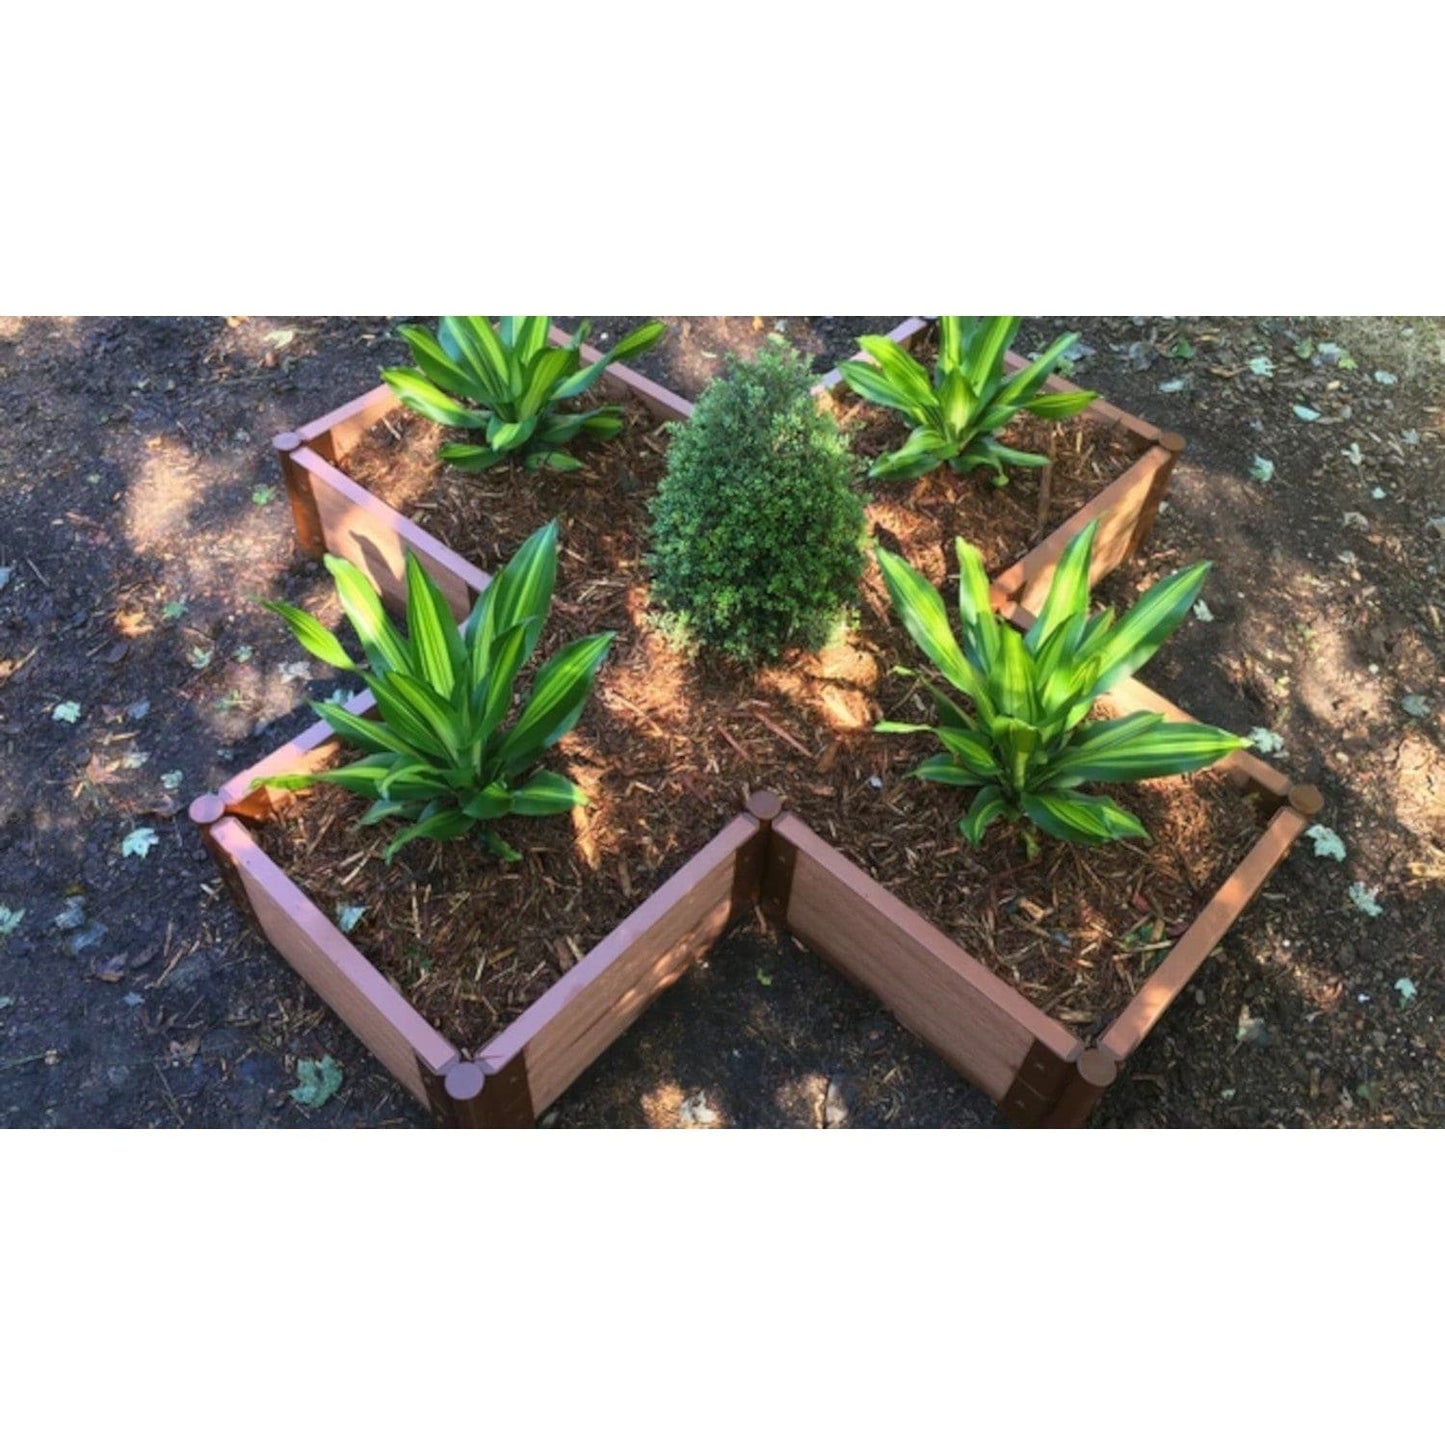 Frame It All Gardening Accessories Frame It All | Tool-Free Military Medallion Raised Garden Bed (Kit Cross) 6' X 6' X 22" - Classic Sienna - 2" Profile 200004487